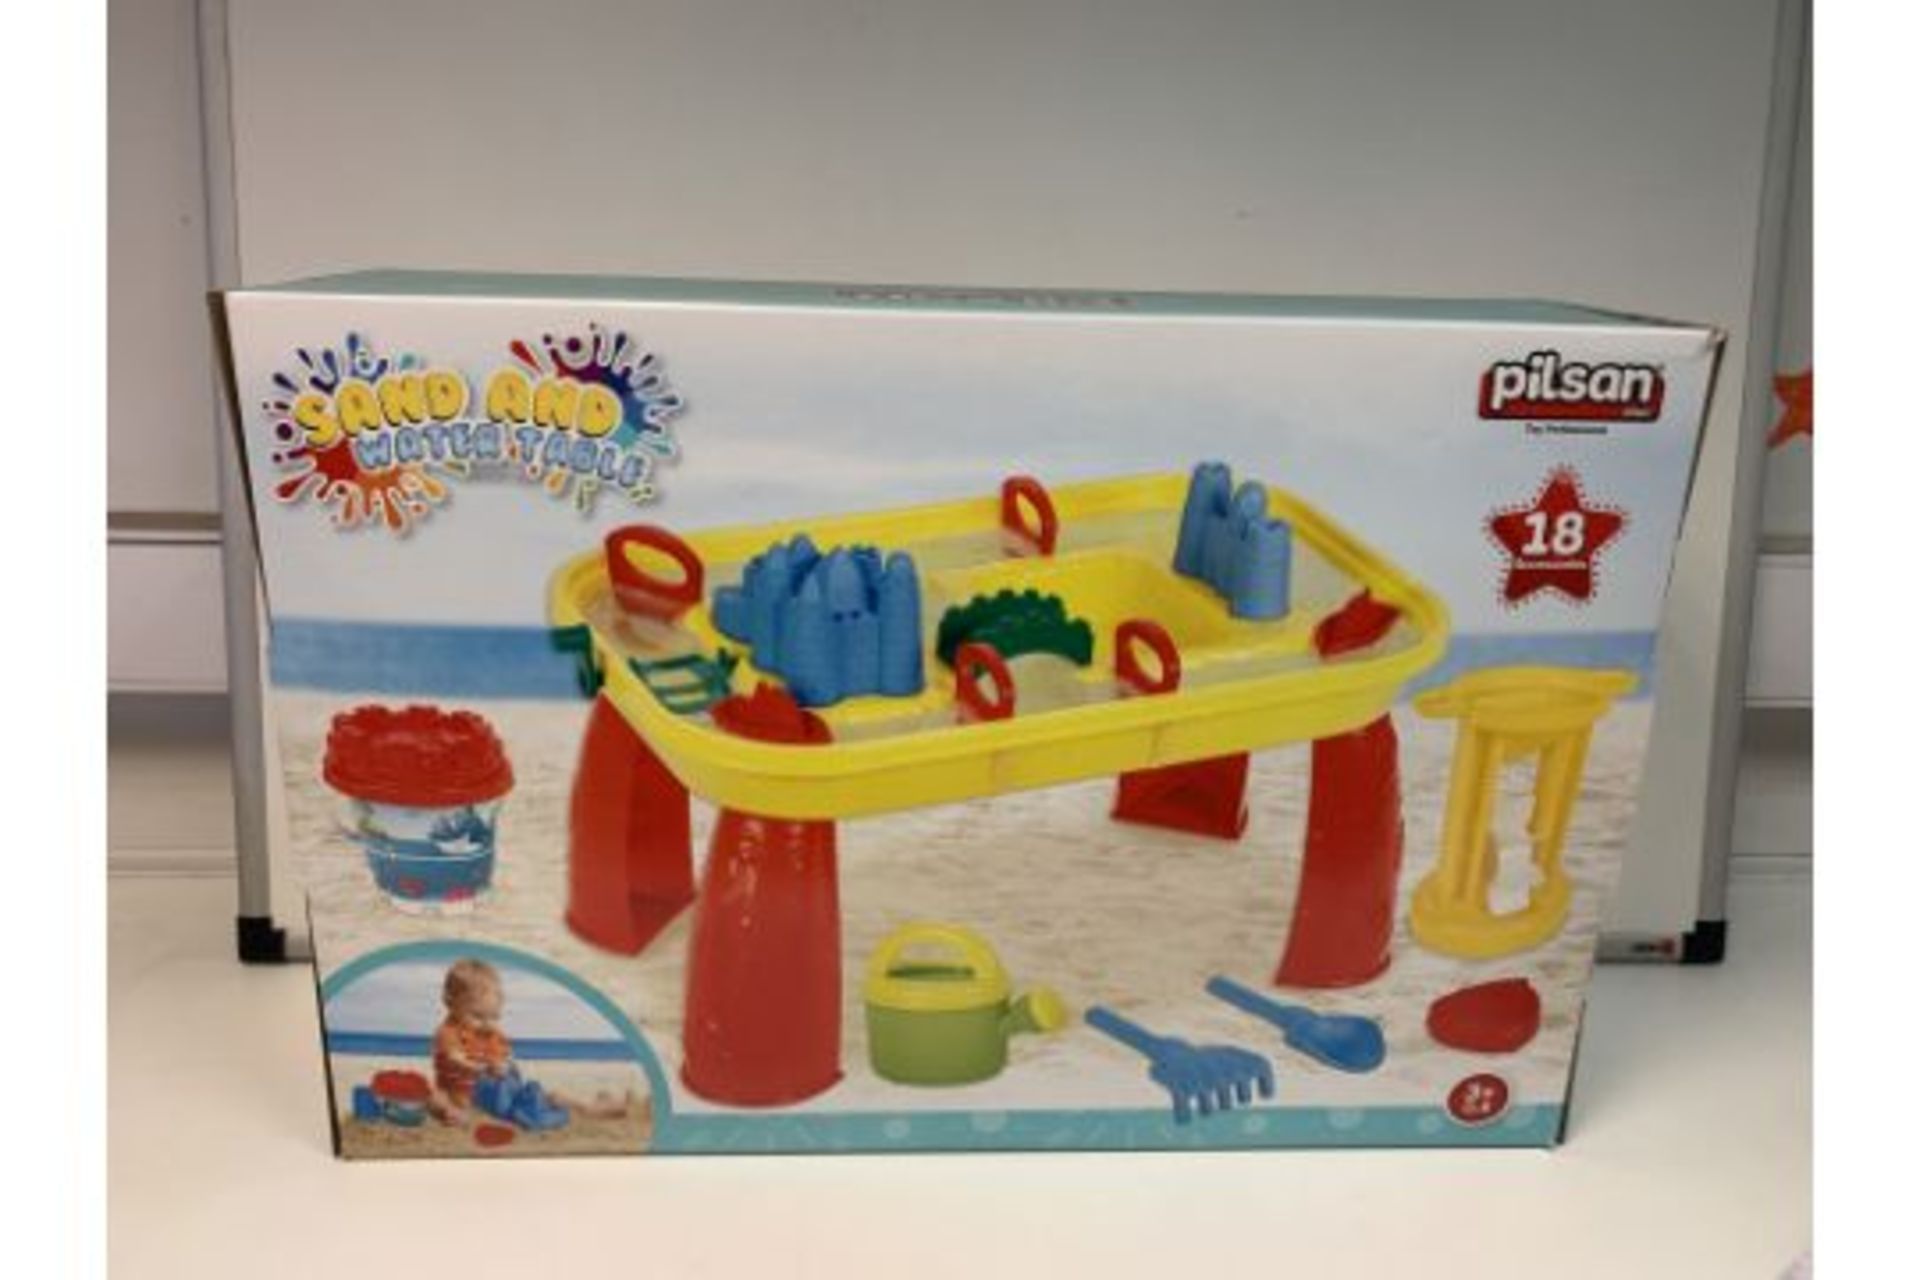 4 X BRAND NEW PILSON 18 PIECE ACCESSORIES SAND AND WATER TABLES (R1TOP)